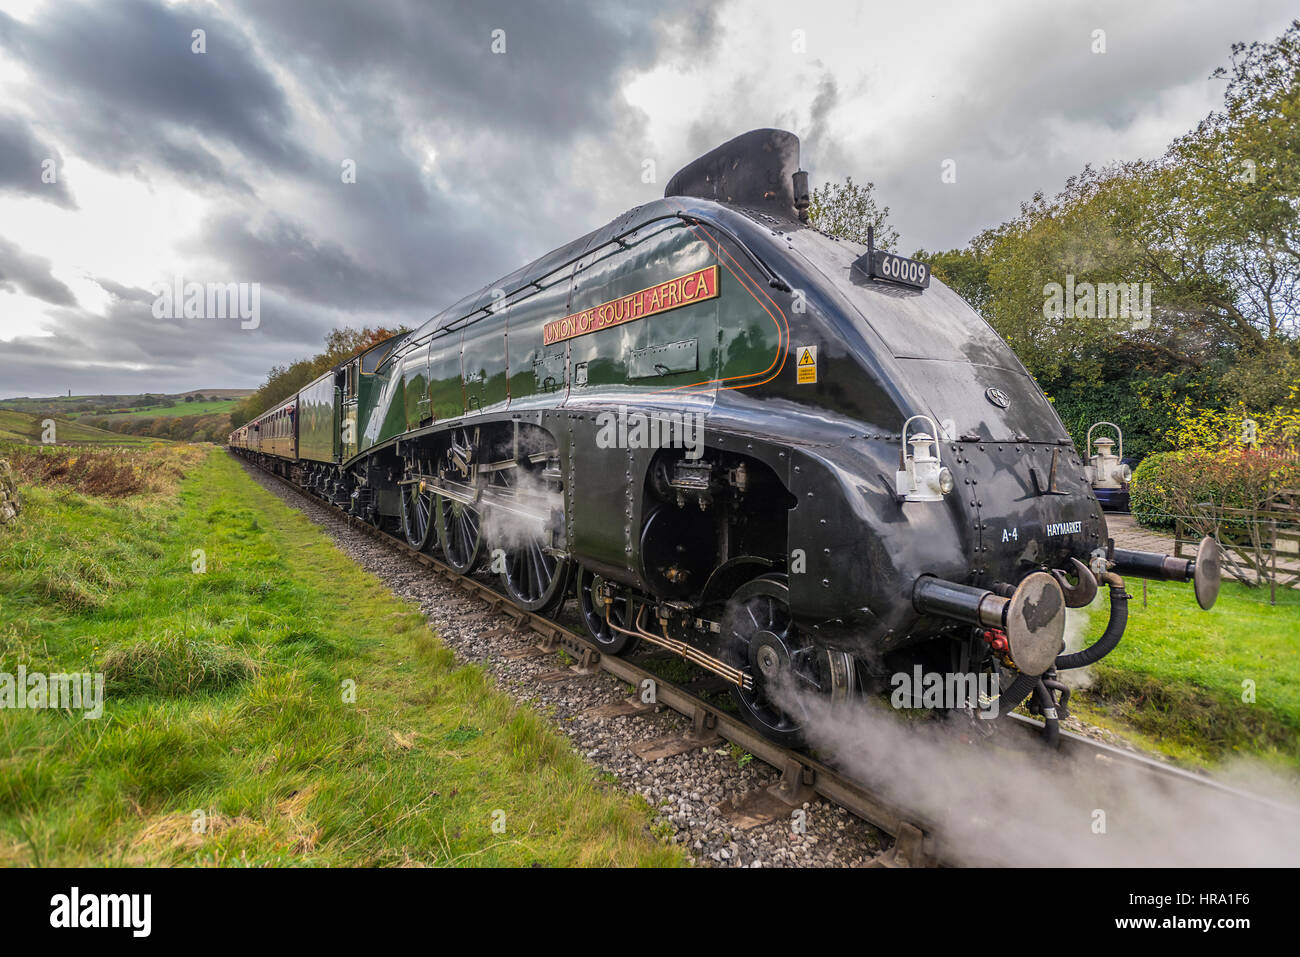 5R A3 Beautiful Steam Locomotive Train 4K Photographic Print sizes available A4